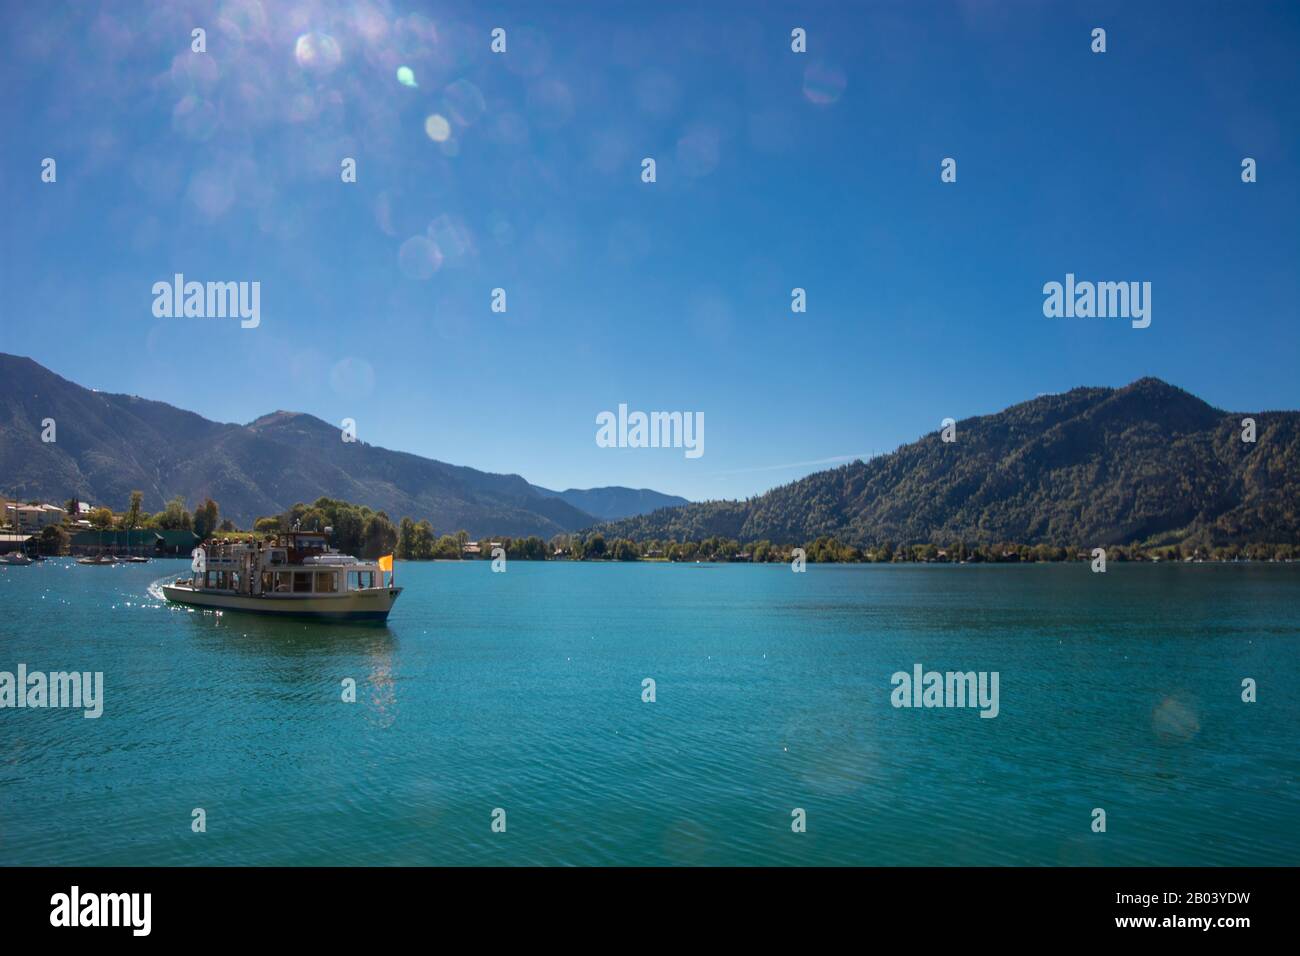 Lake Tegernsee in the bavarian alps / Germany Stock Photo